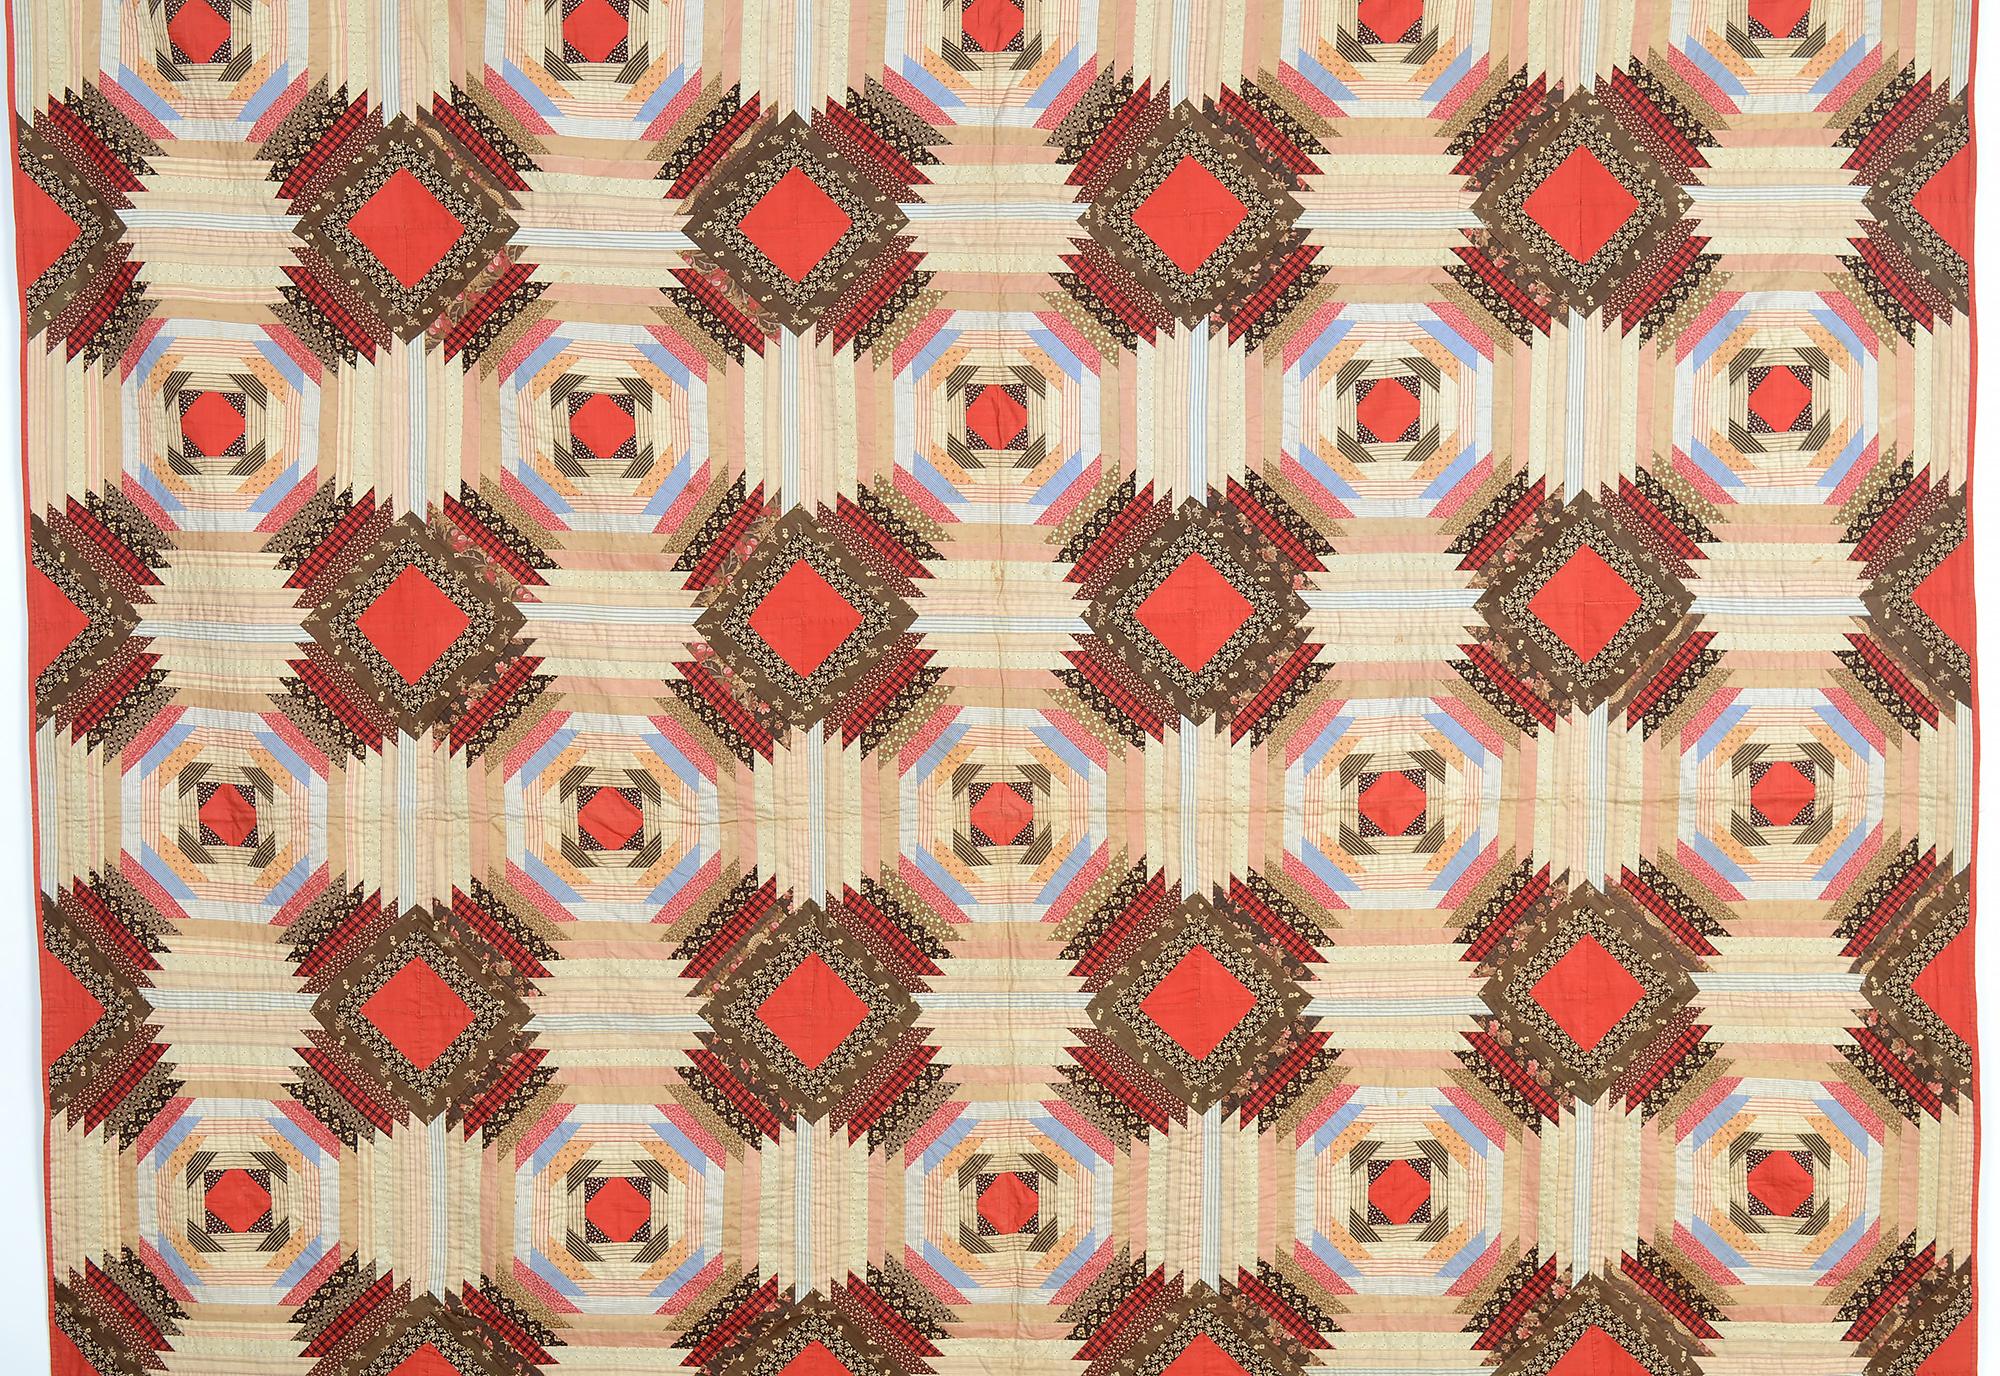 The Windmill Blades (aka Pineapple Log Cabin) quilt is always a design with lots of strong movement. In this example, the solid red centers effectively play off against the remaining printed fabrics. The use of dark prints around the red centers of